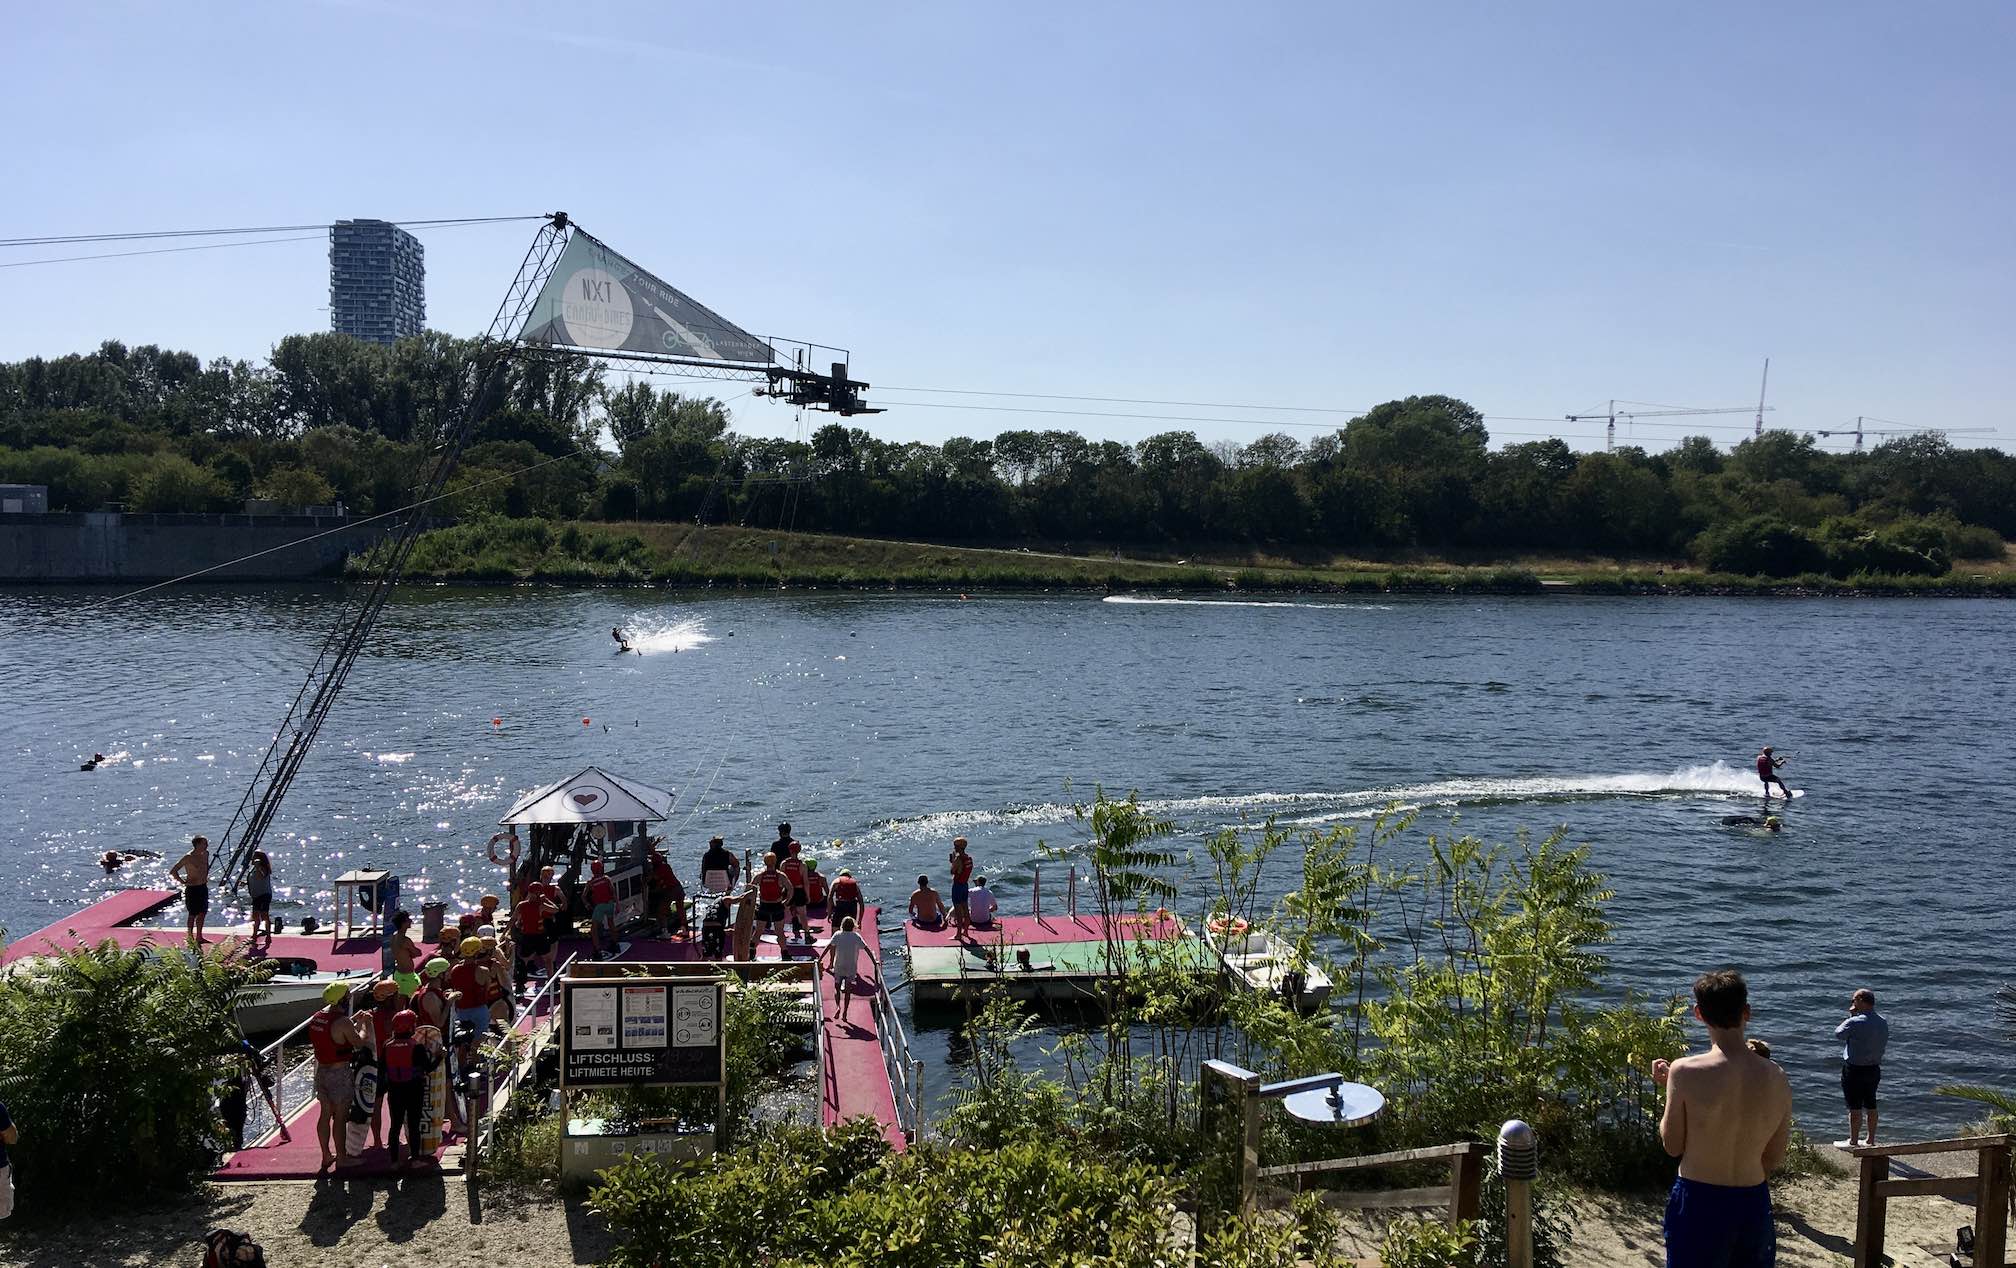 Sunny photo of cable wakeboard park by river with a queue of people on the dock